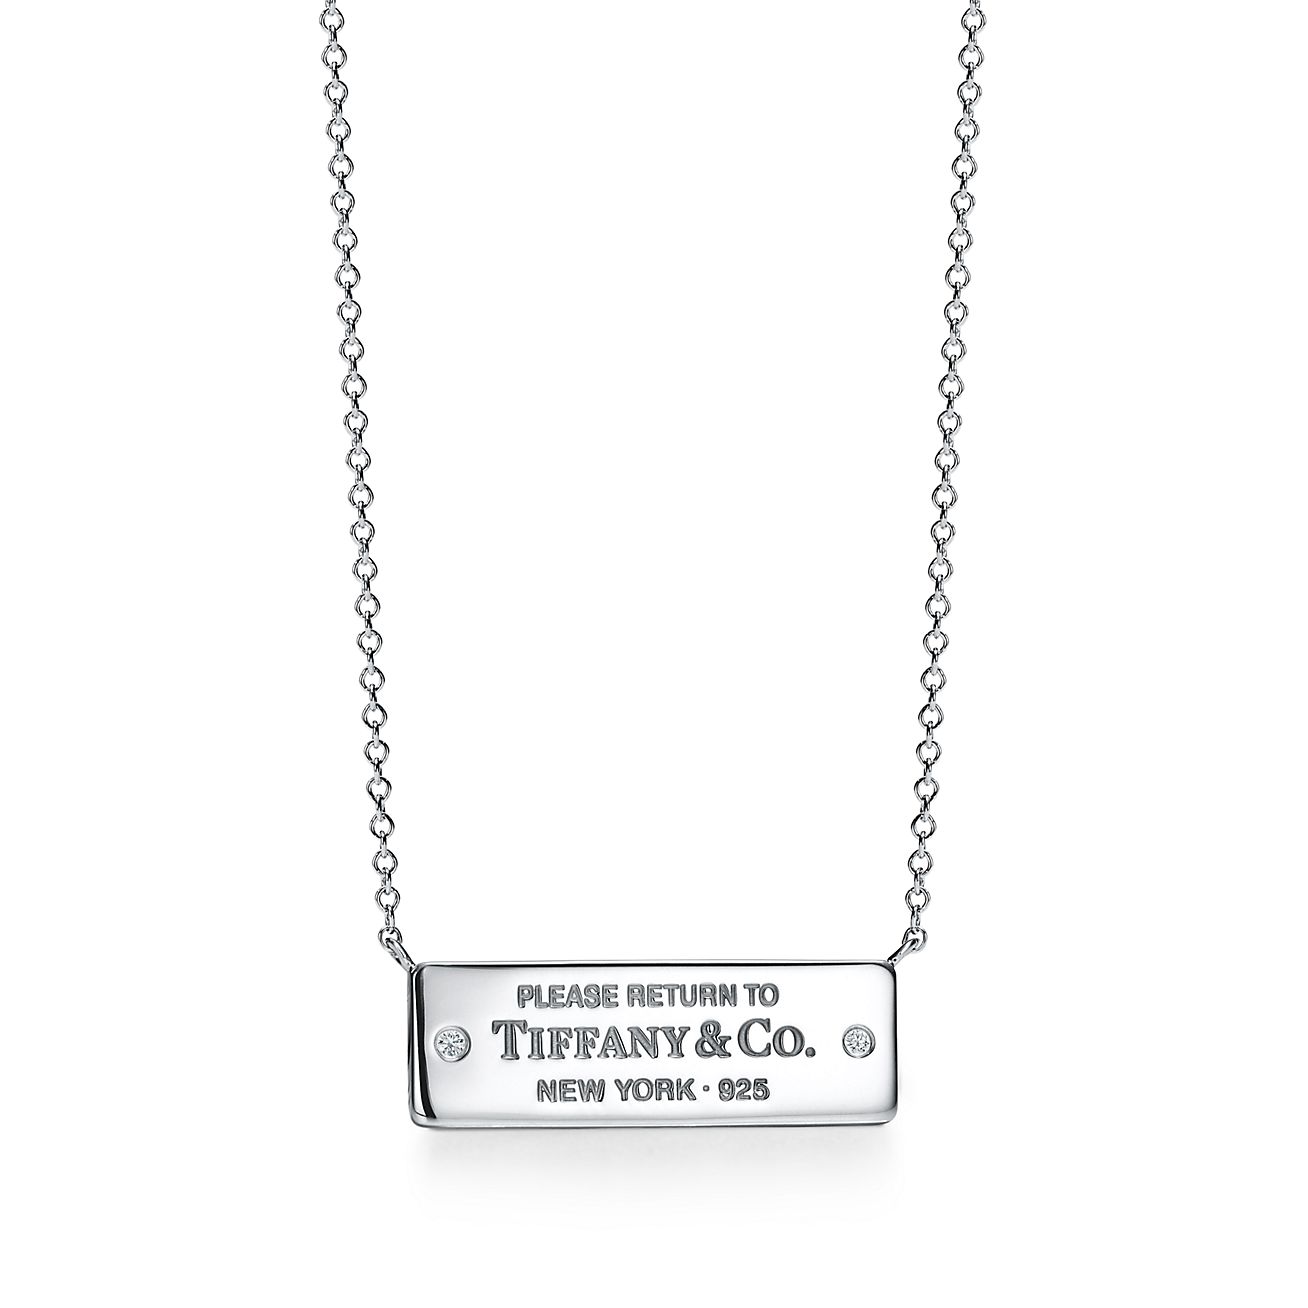 tiffany's sterling silver chain